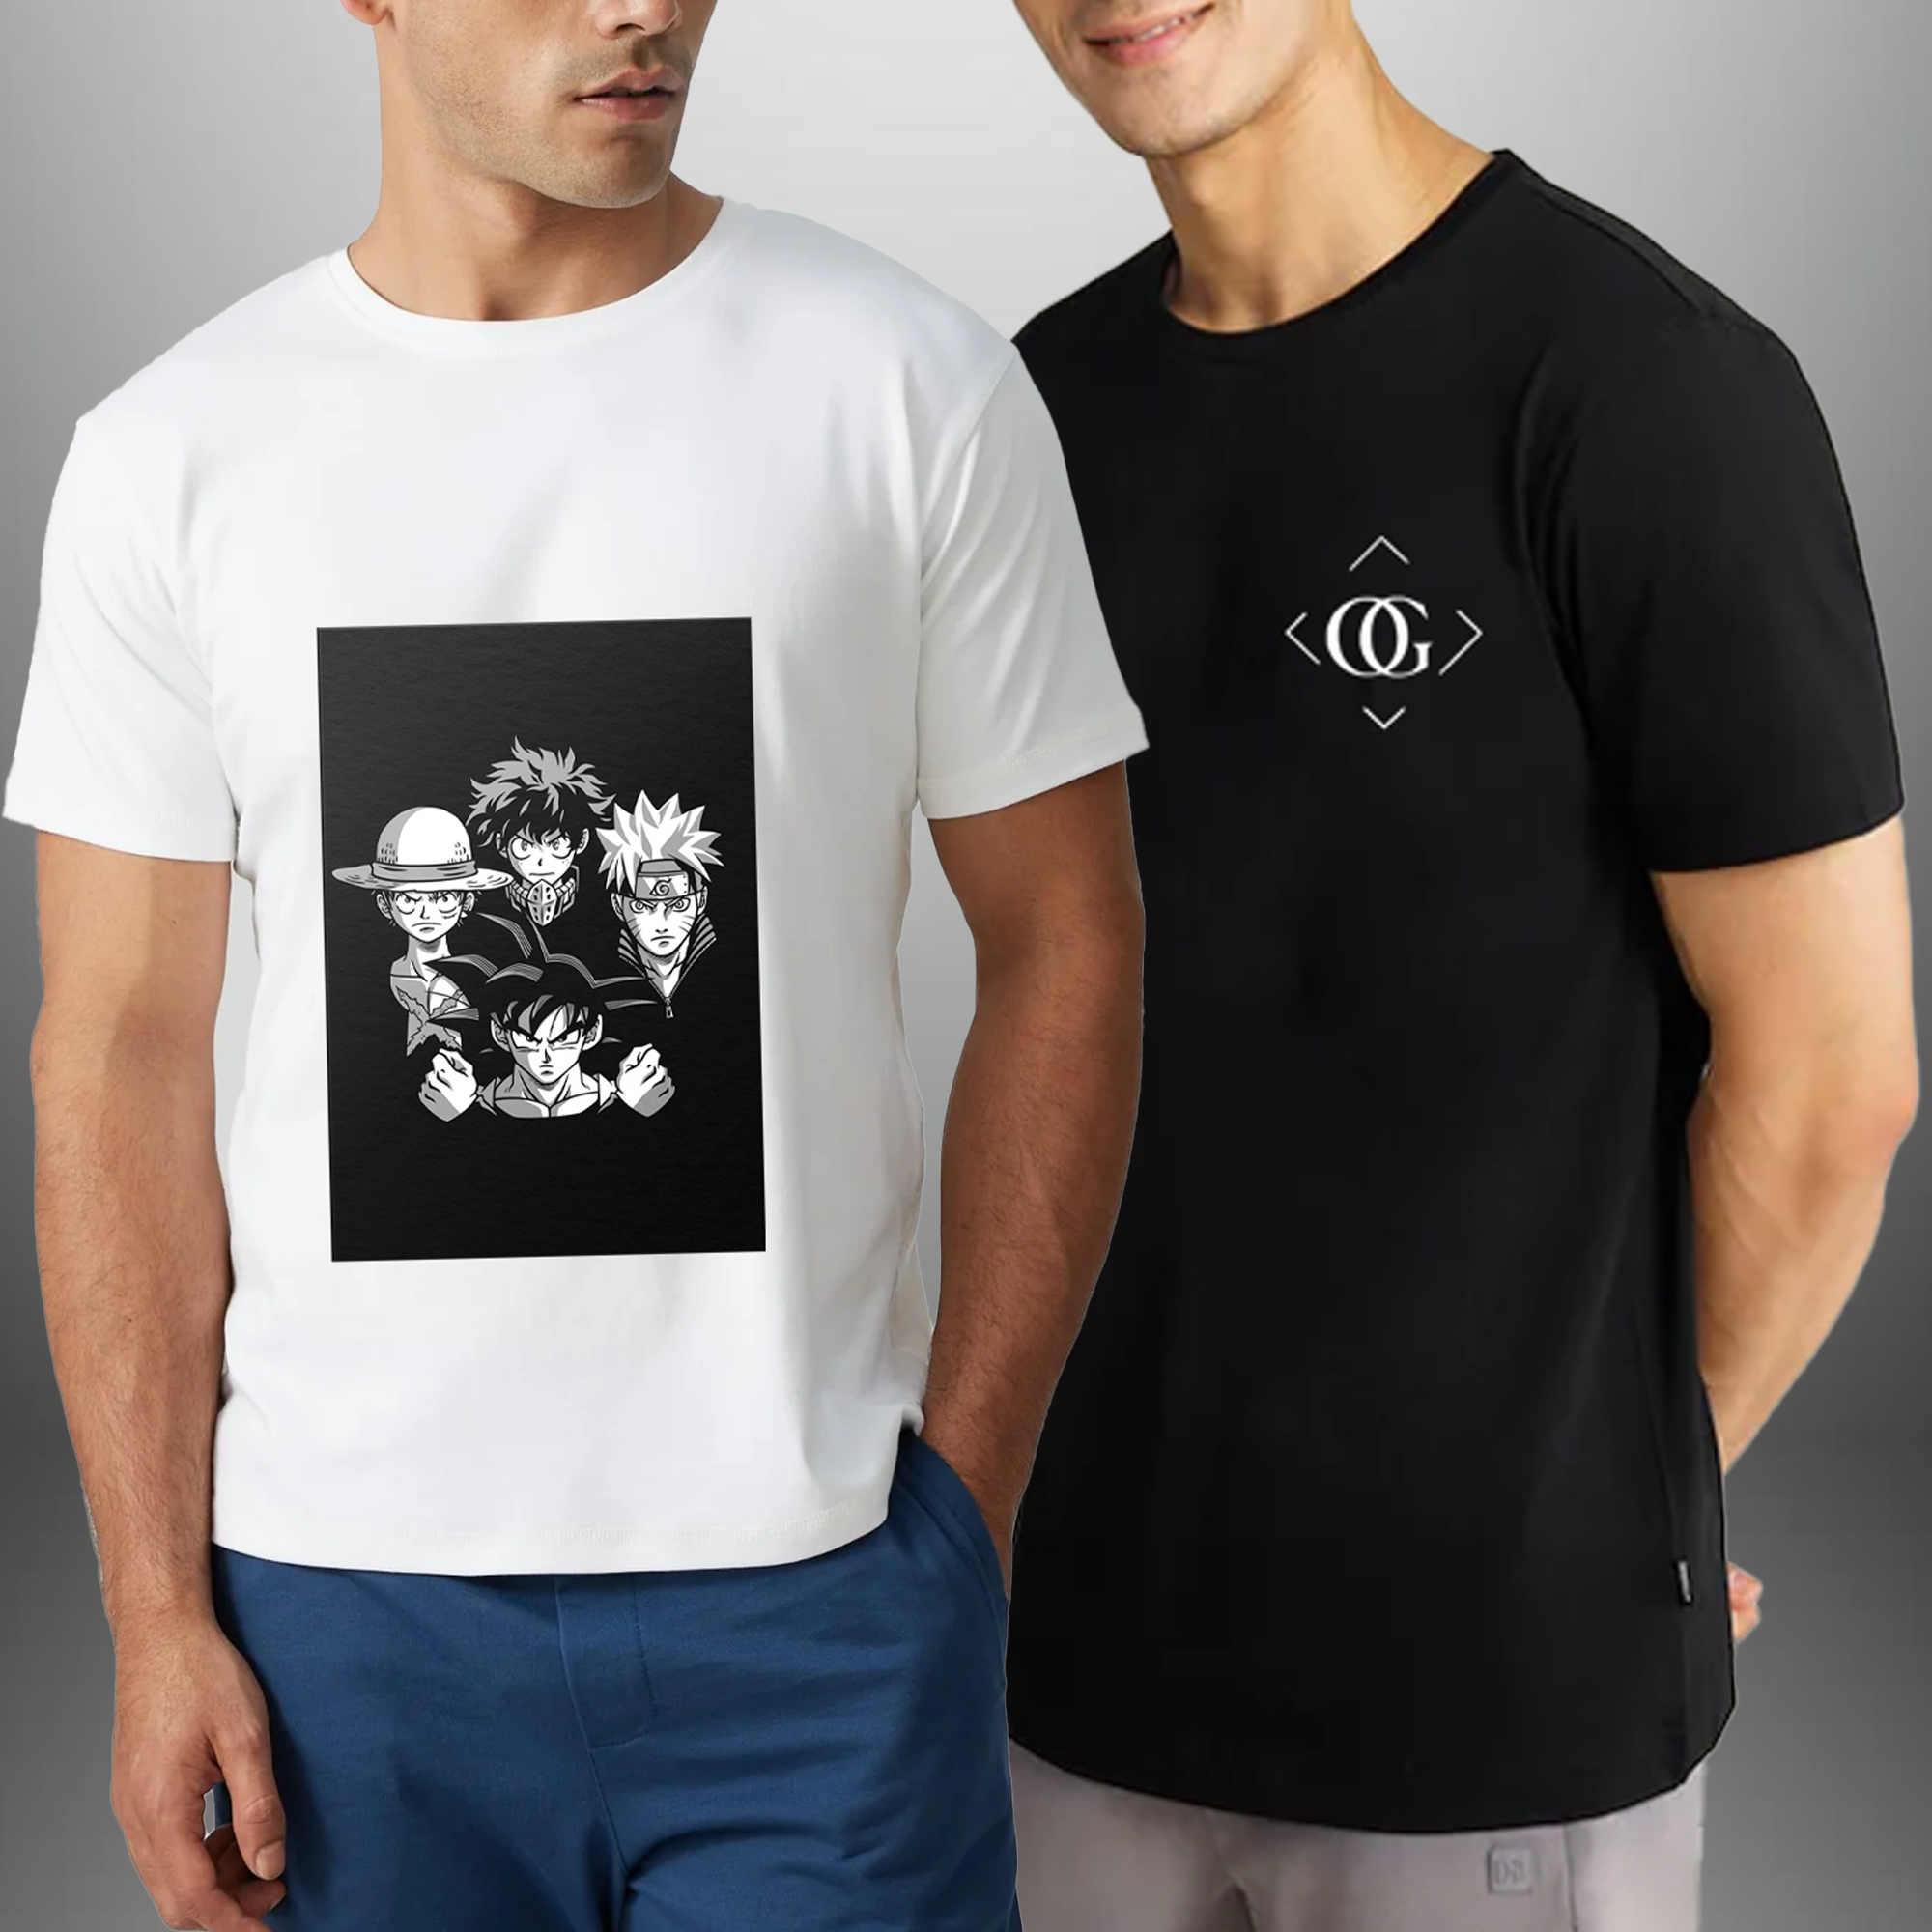 Pack Of 2 Men's  Black & White Graphic Printed T-Shirts-RKTMCO002